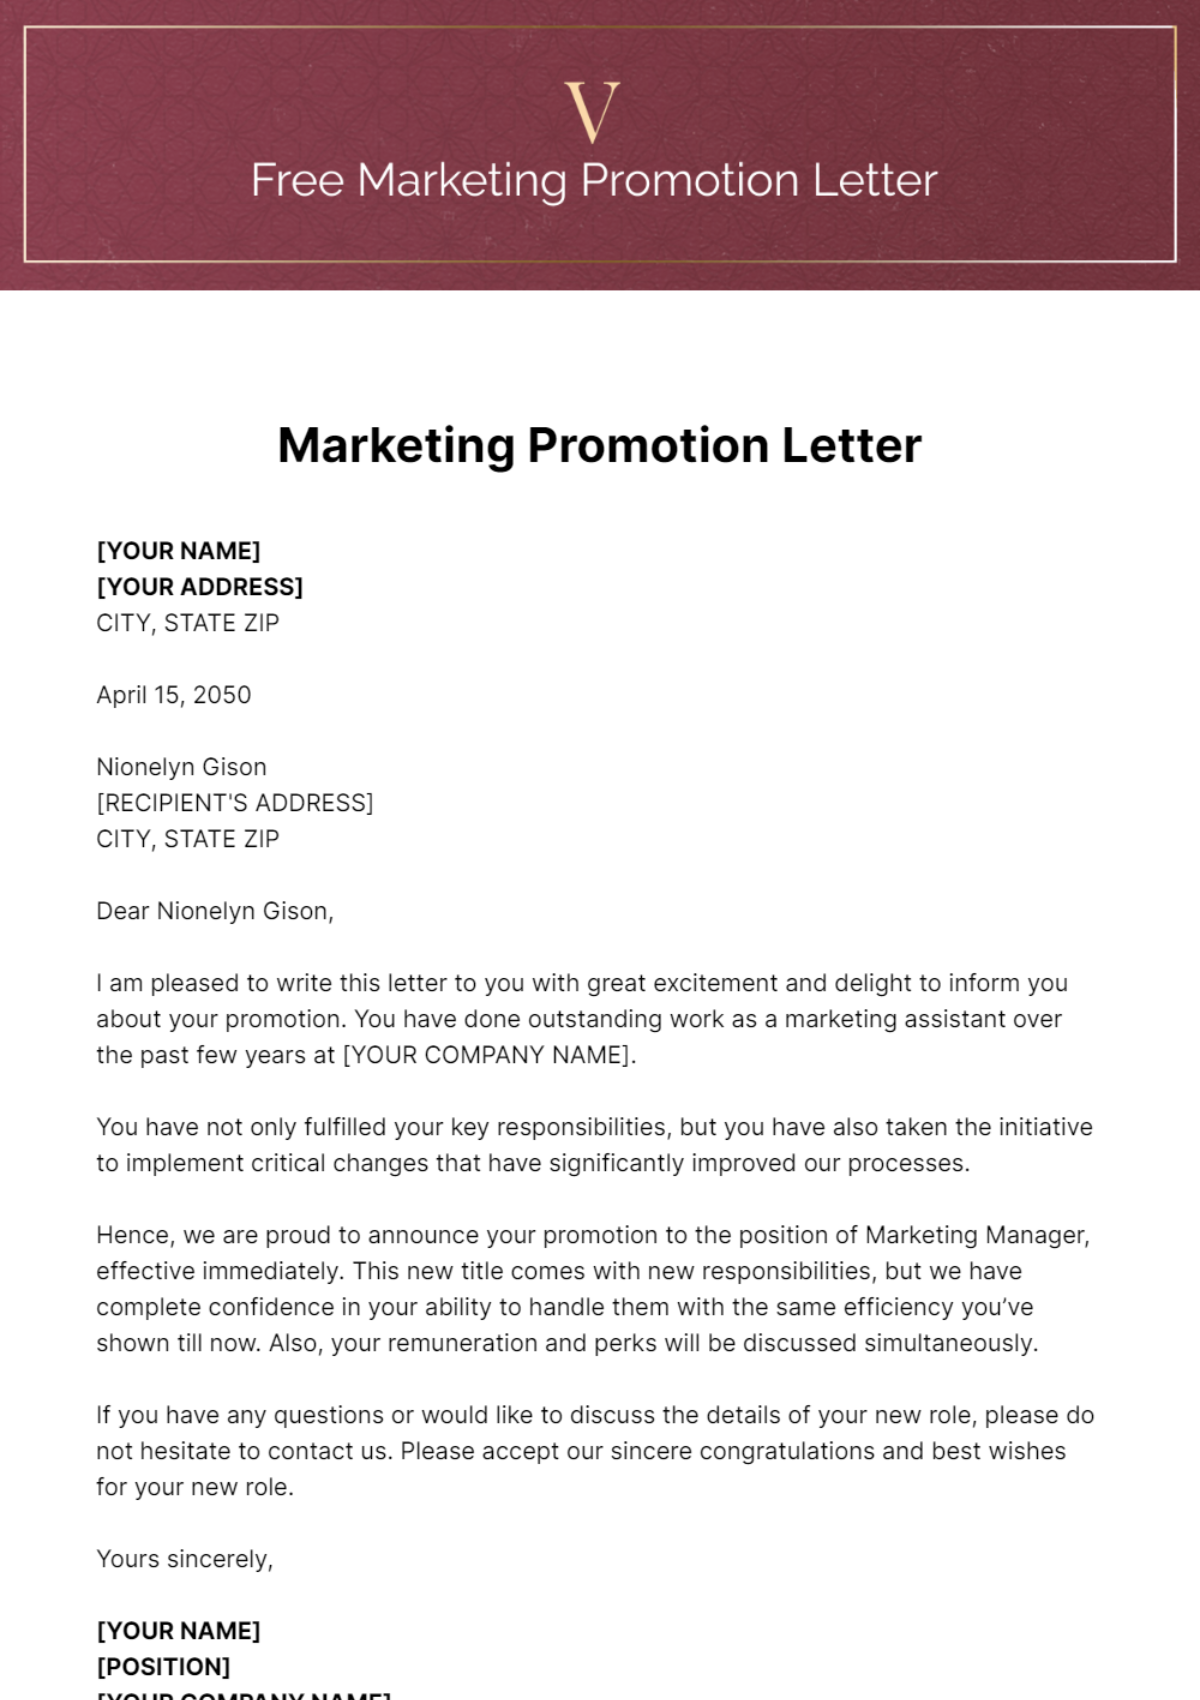 Free Marketing Promotion Letter Template